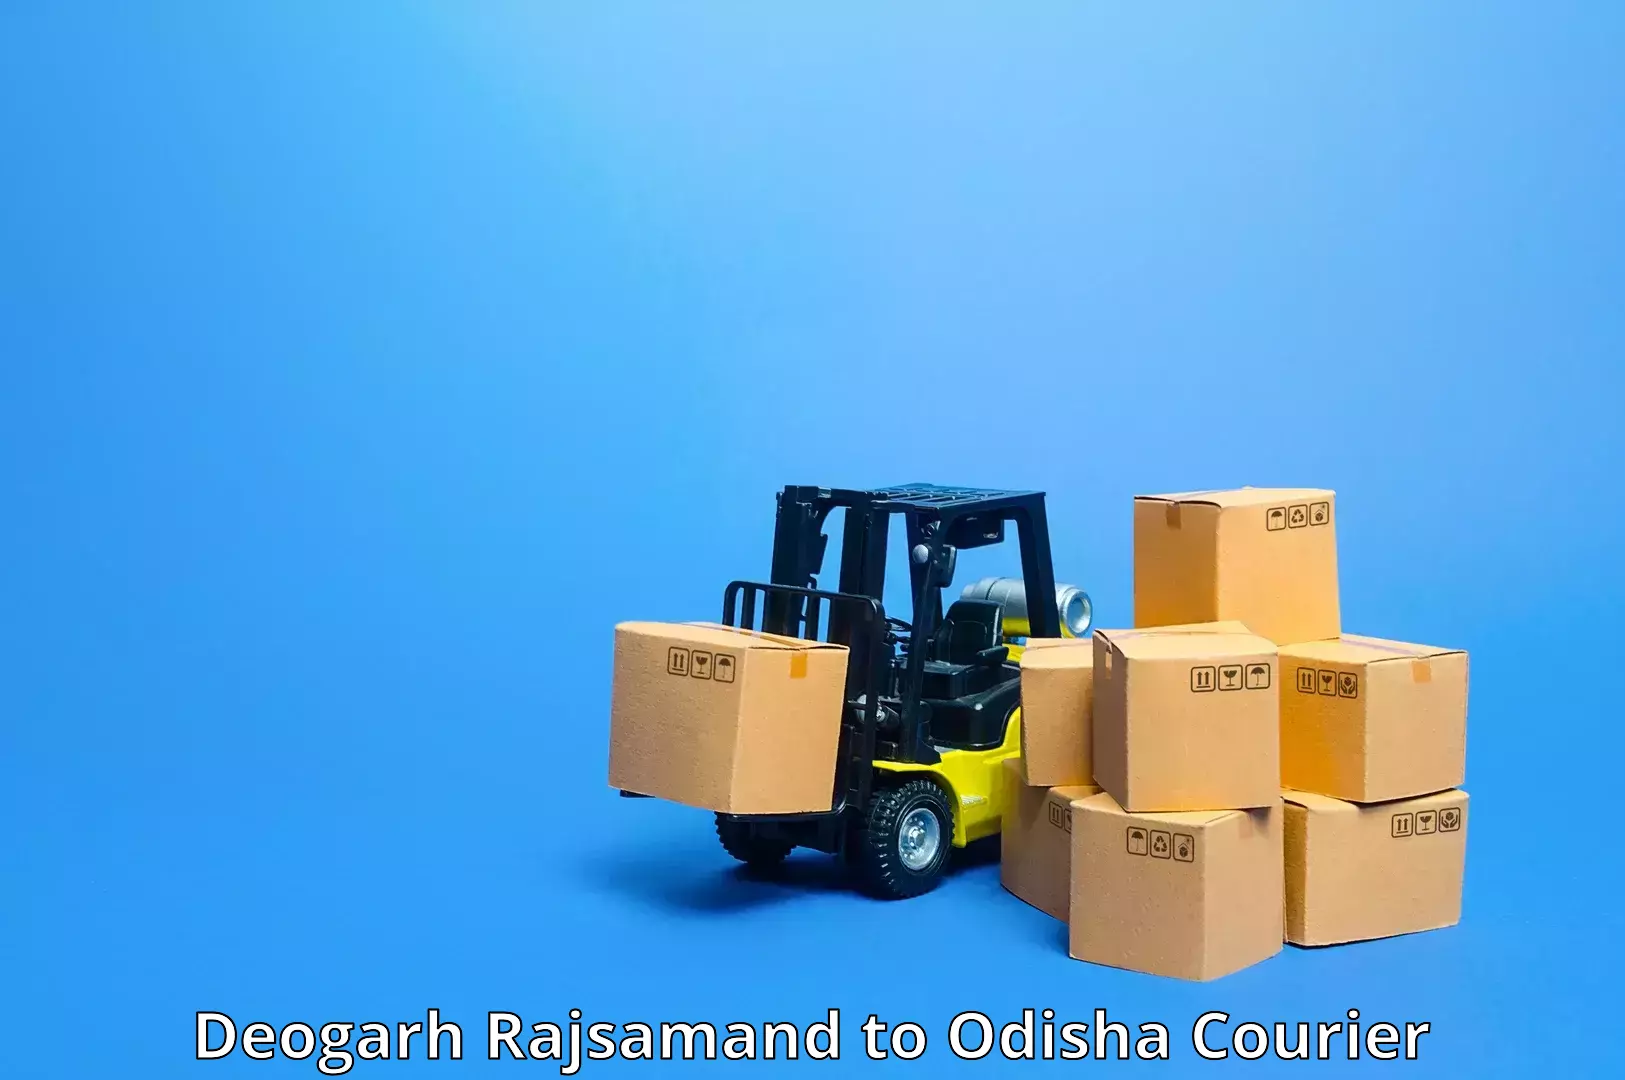 Reliable logistics providers Deogarh Rajsamand to Bheden